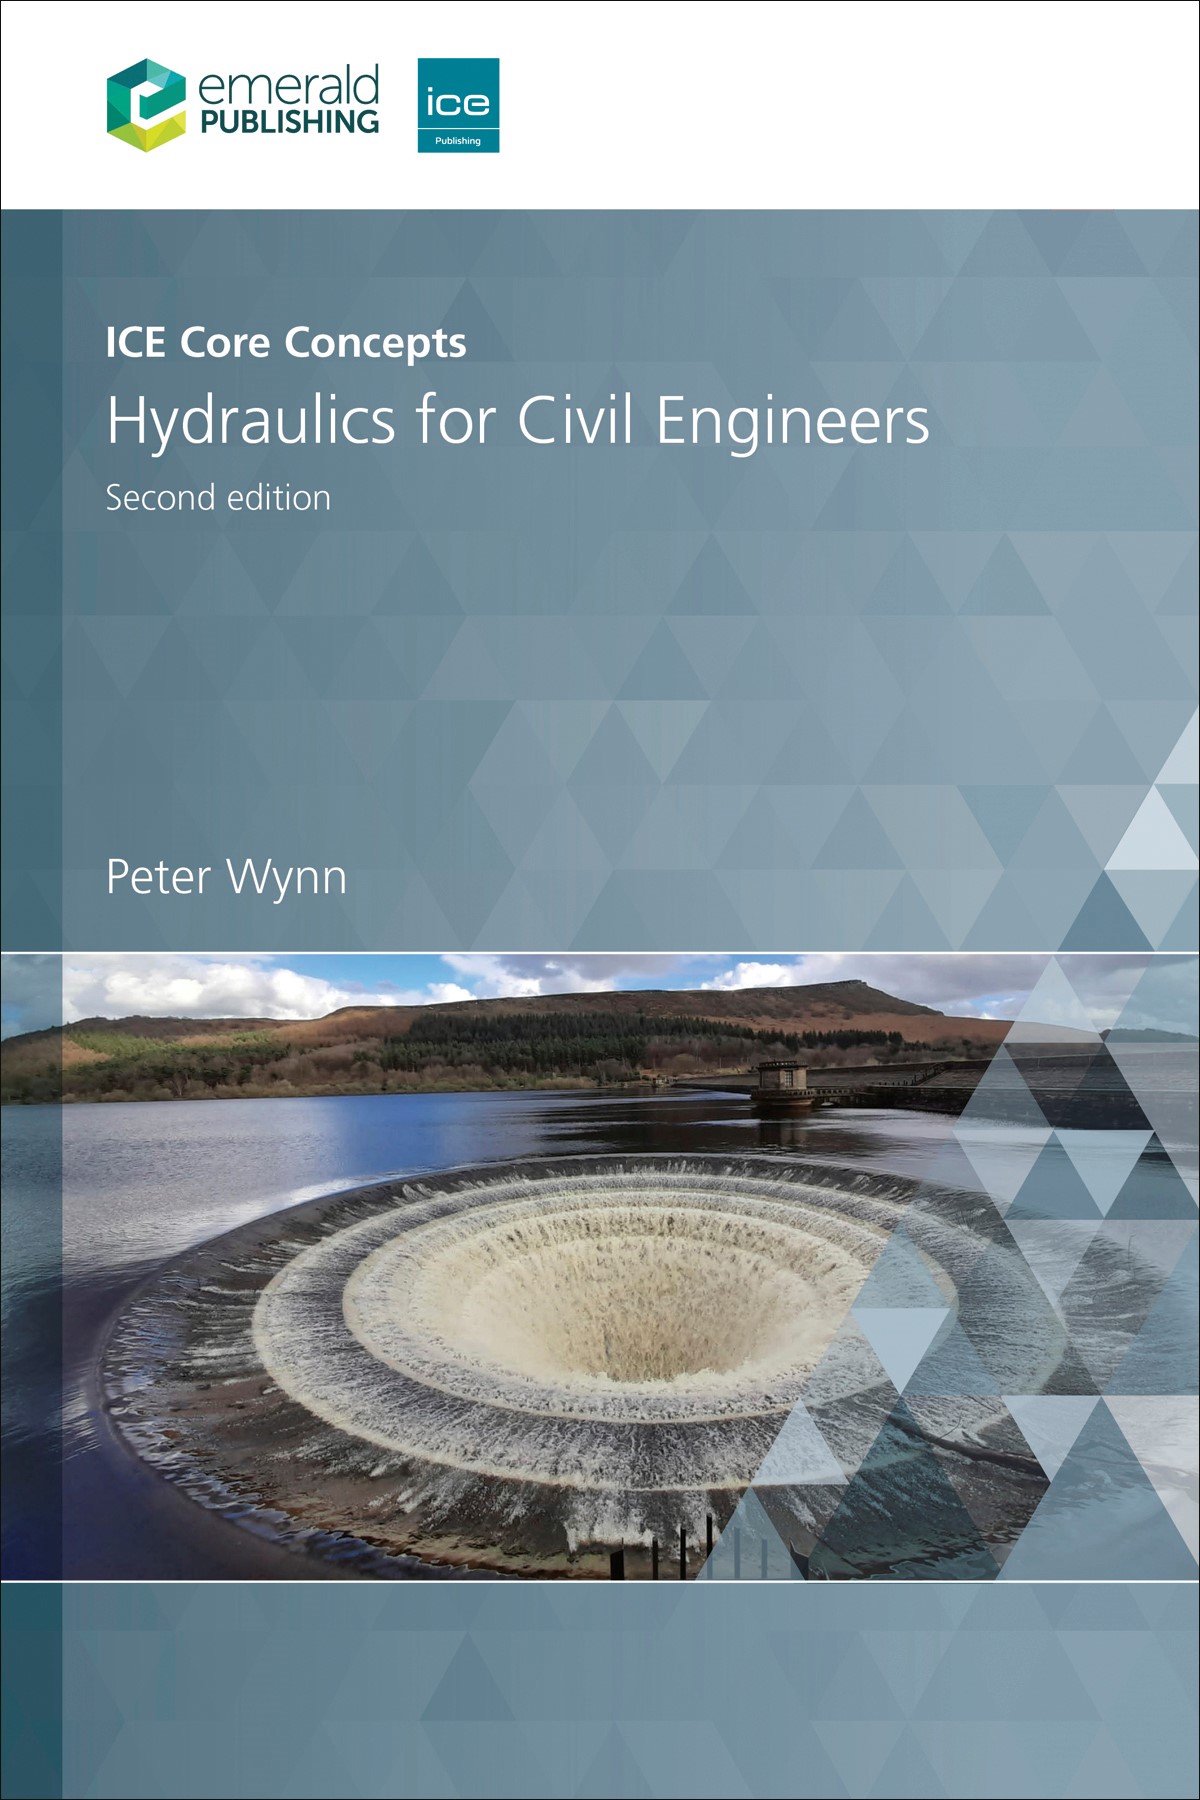 ICE Core Concepts: Hydraulics for Civil Engineers